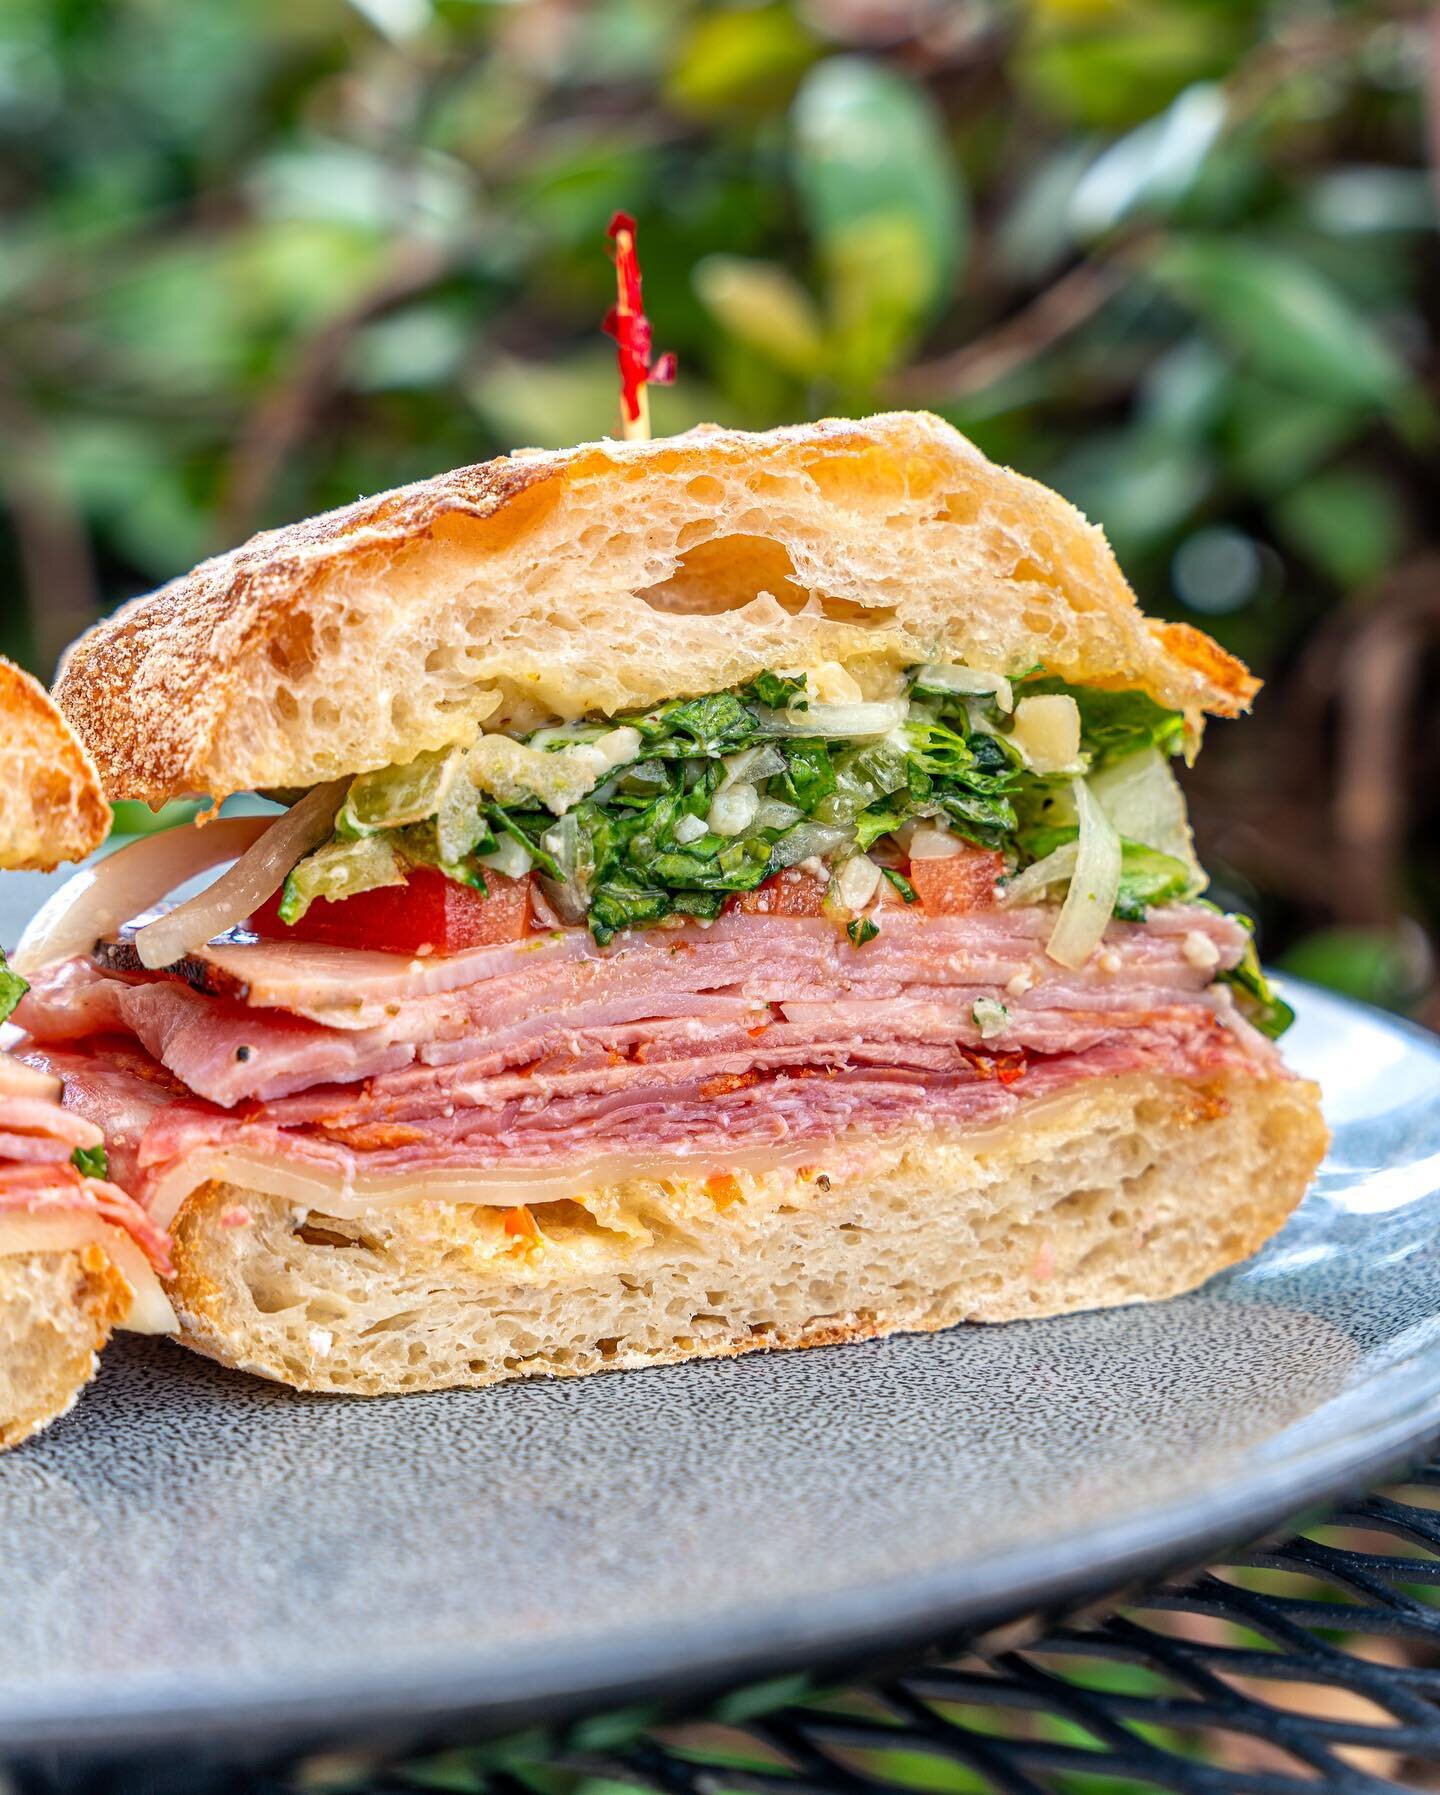 We look forward to getting the weekend started with everyone. See you tomorrow for lunch!

Pictured: Hawthorn Italian
Salami, capicola, black forest ham, provolone, pickled Italian sweet peppers, shredded lettuce, shaved sweet onion, tomato, aioli, p